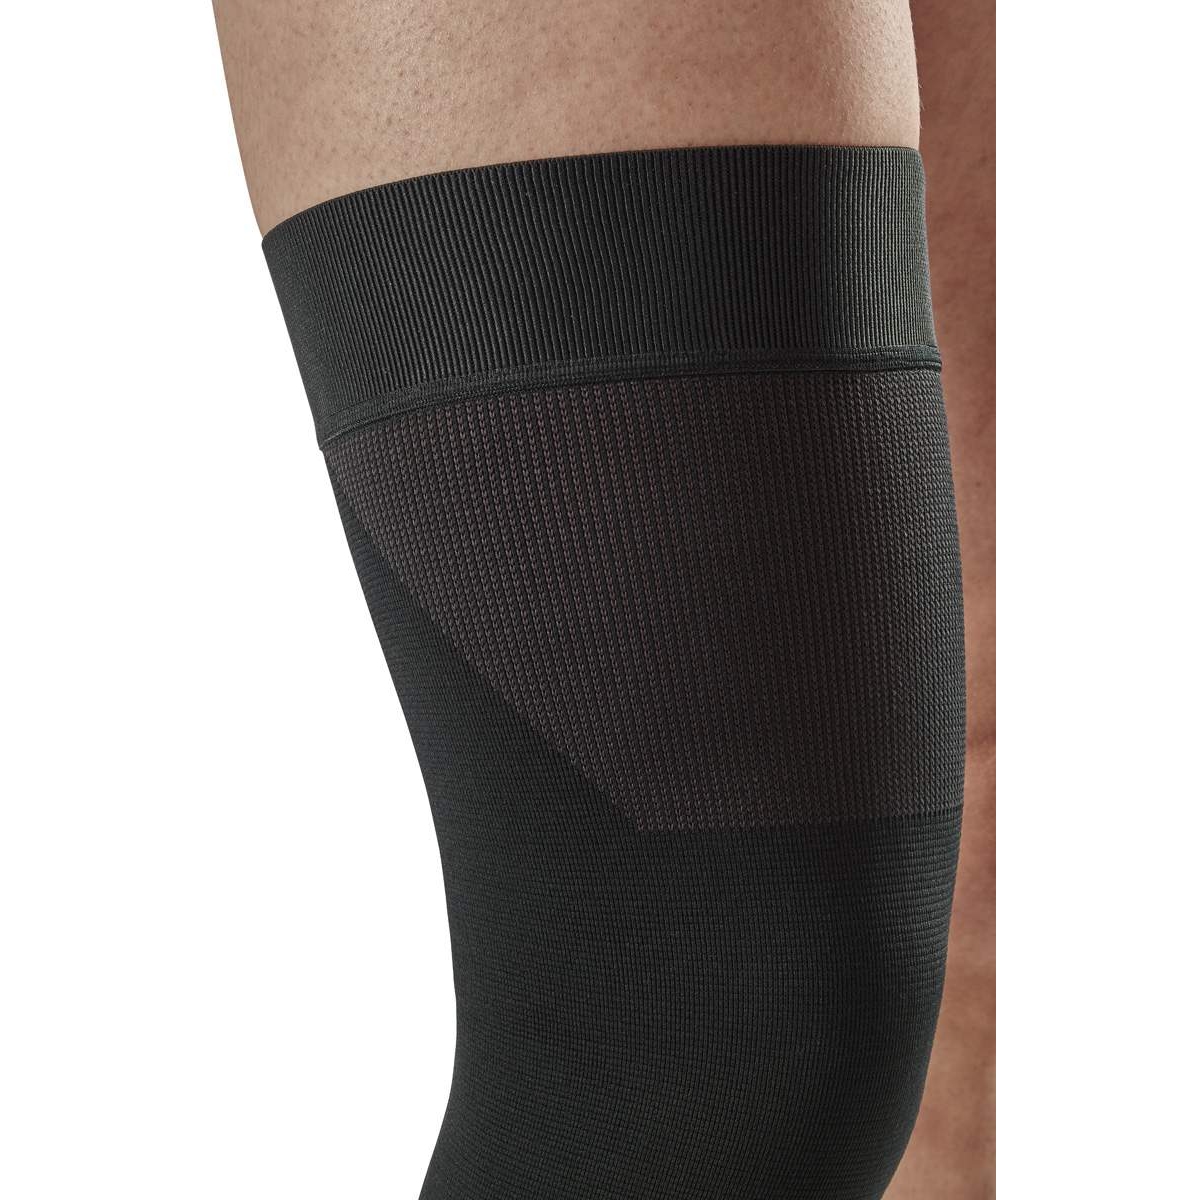 CEP Mid Support Compression Knee Sleeve - black